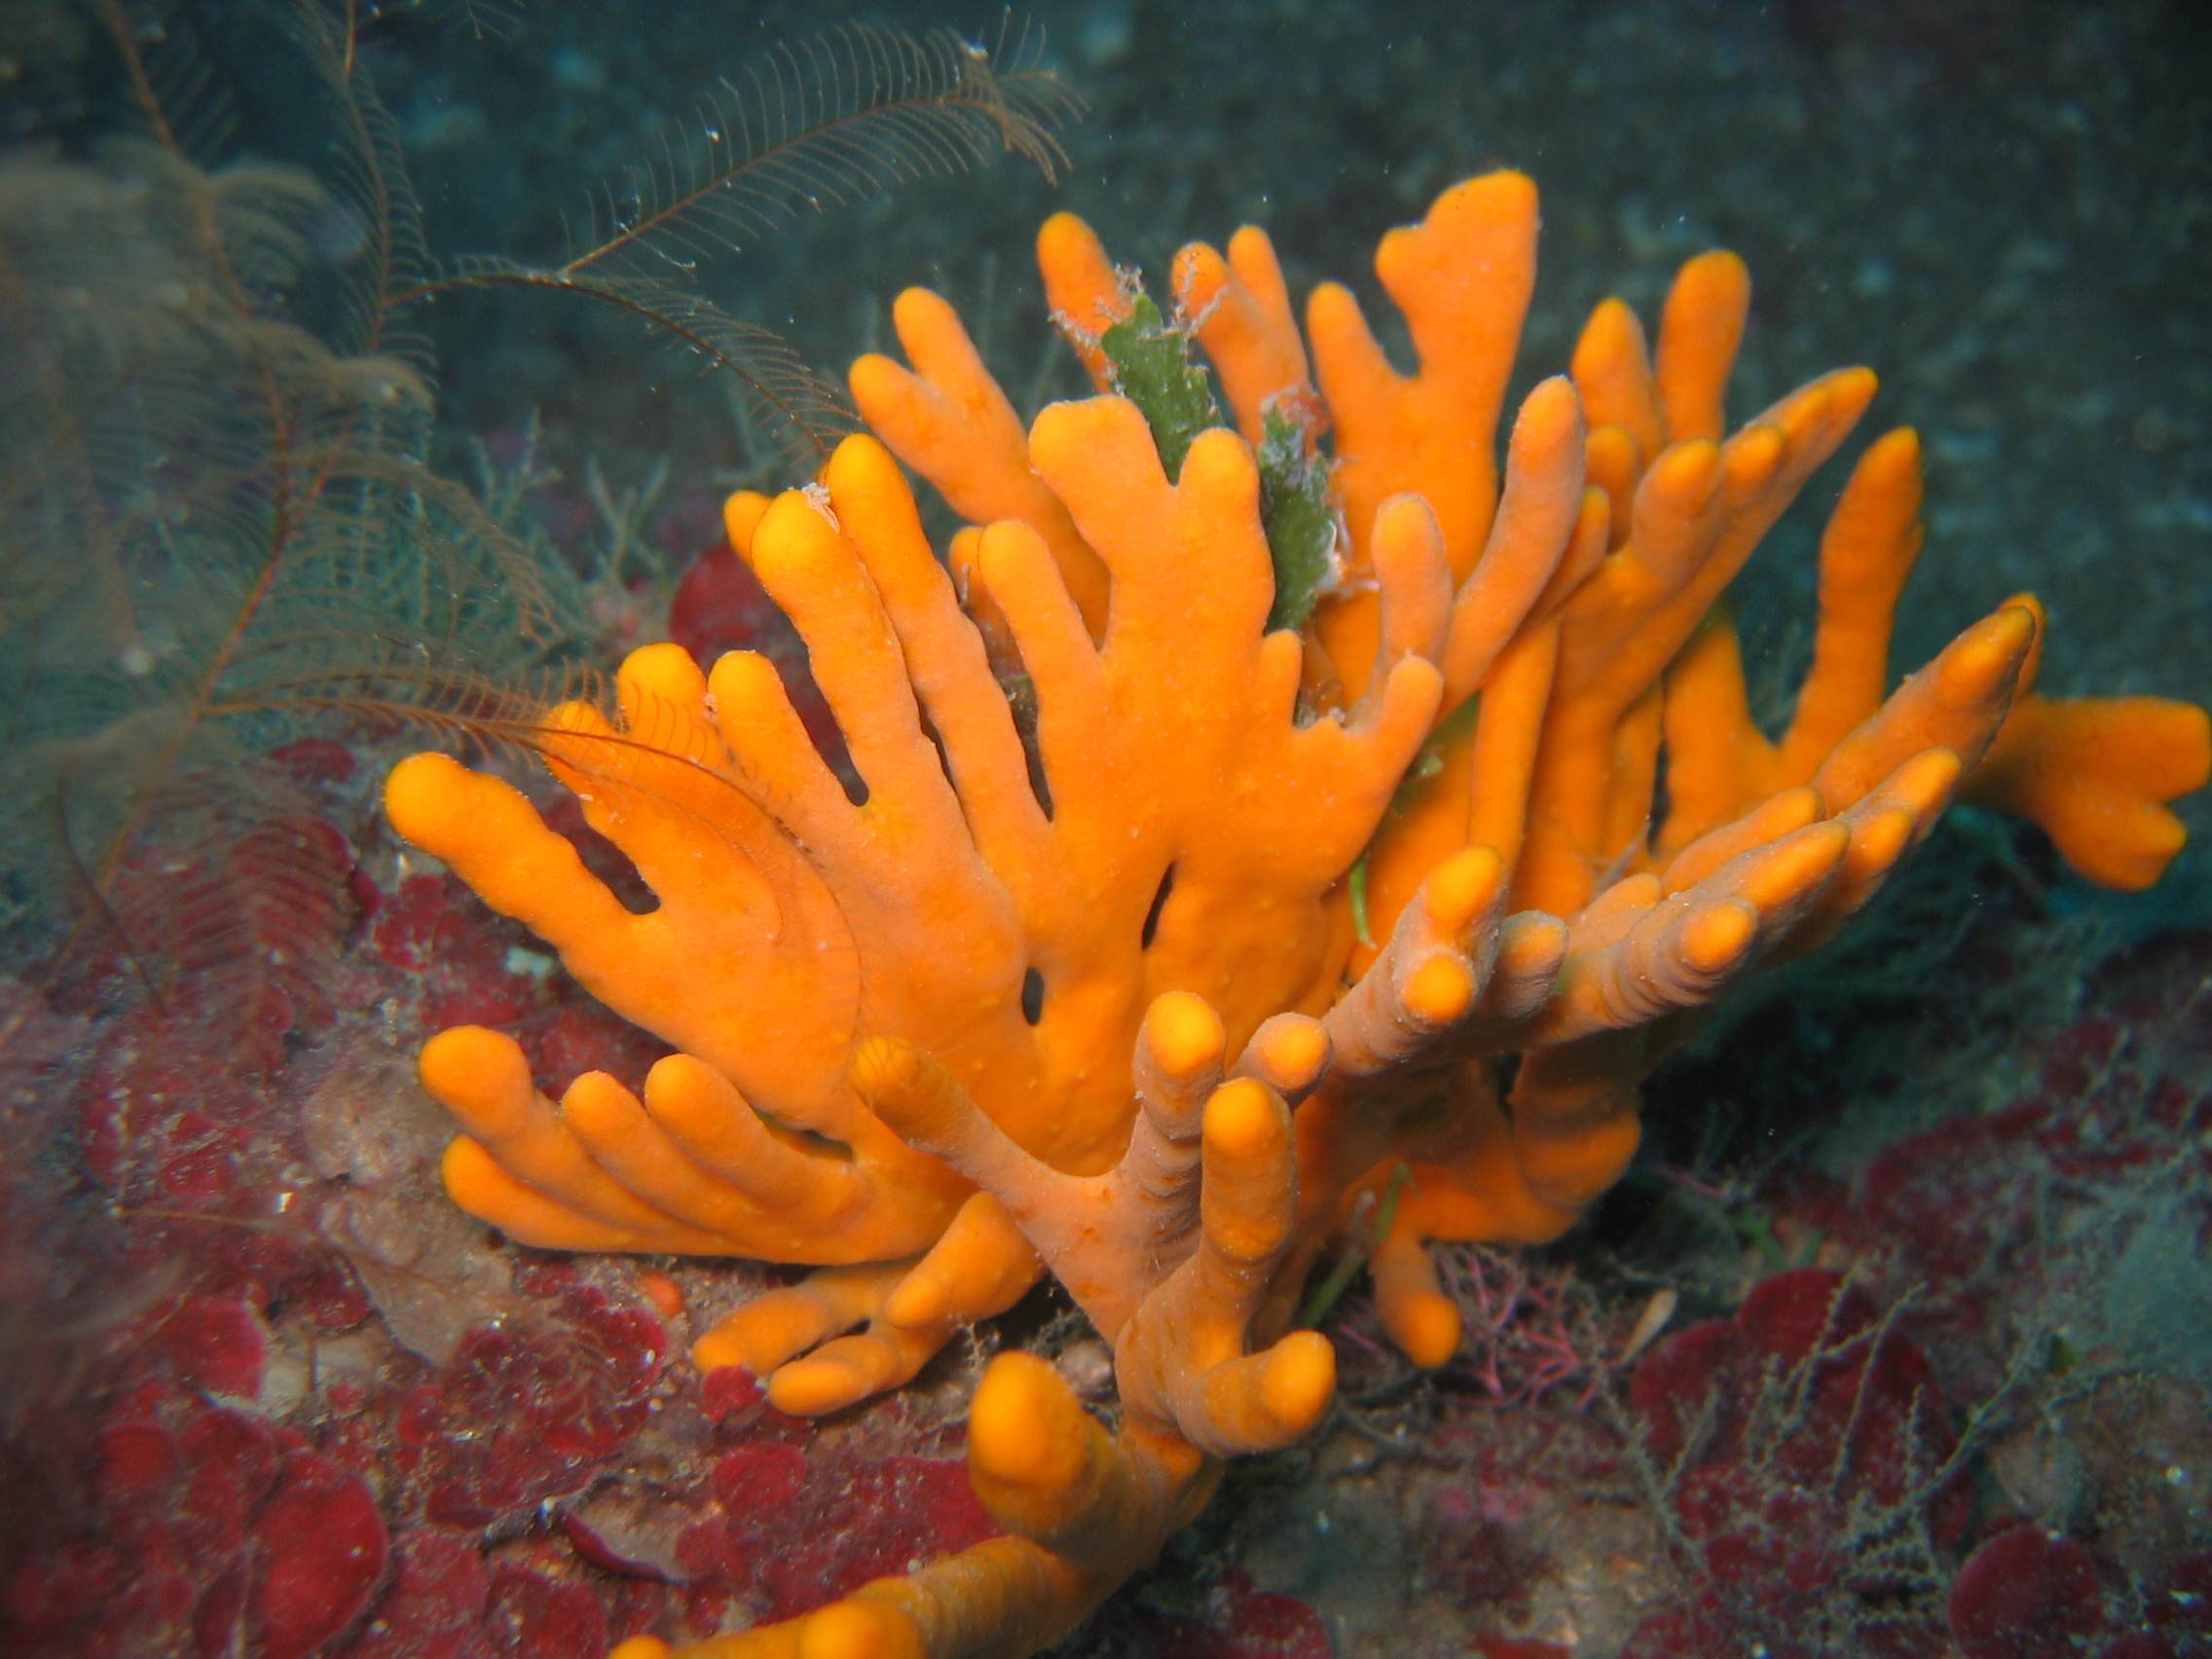 Why are sea sponges important?